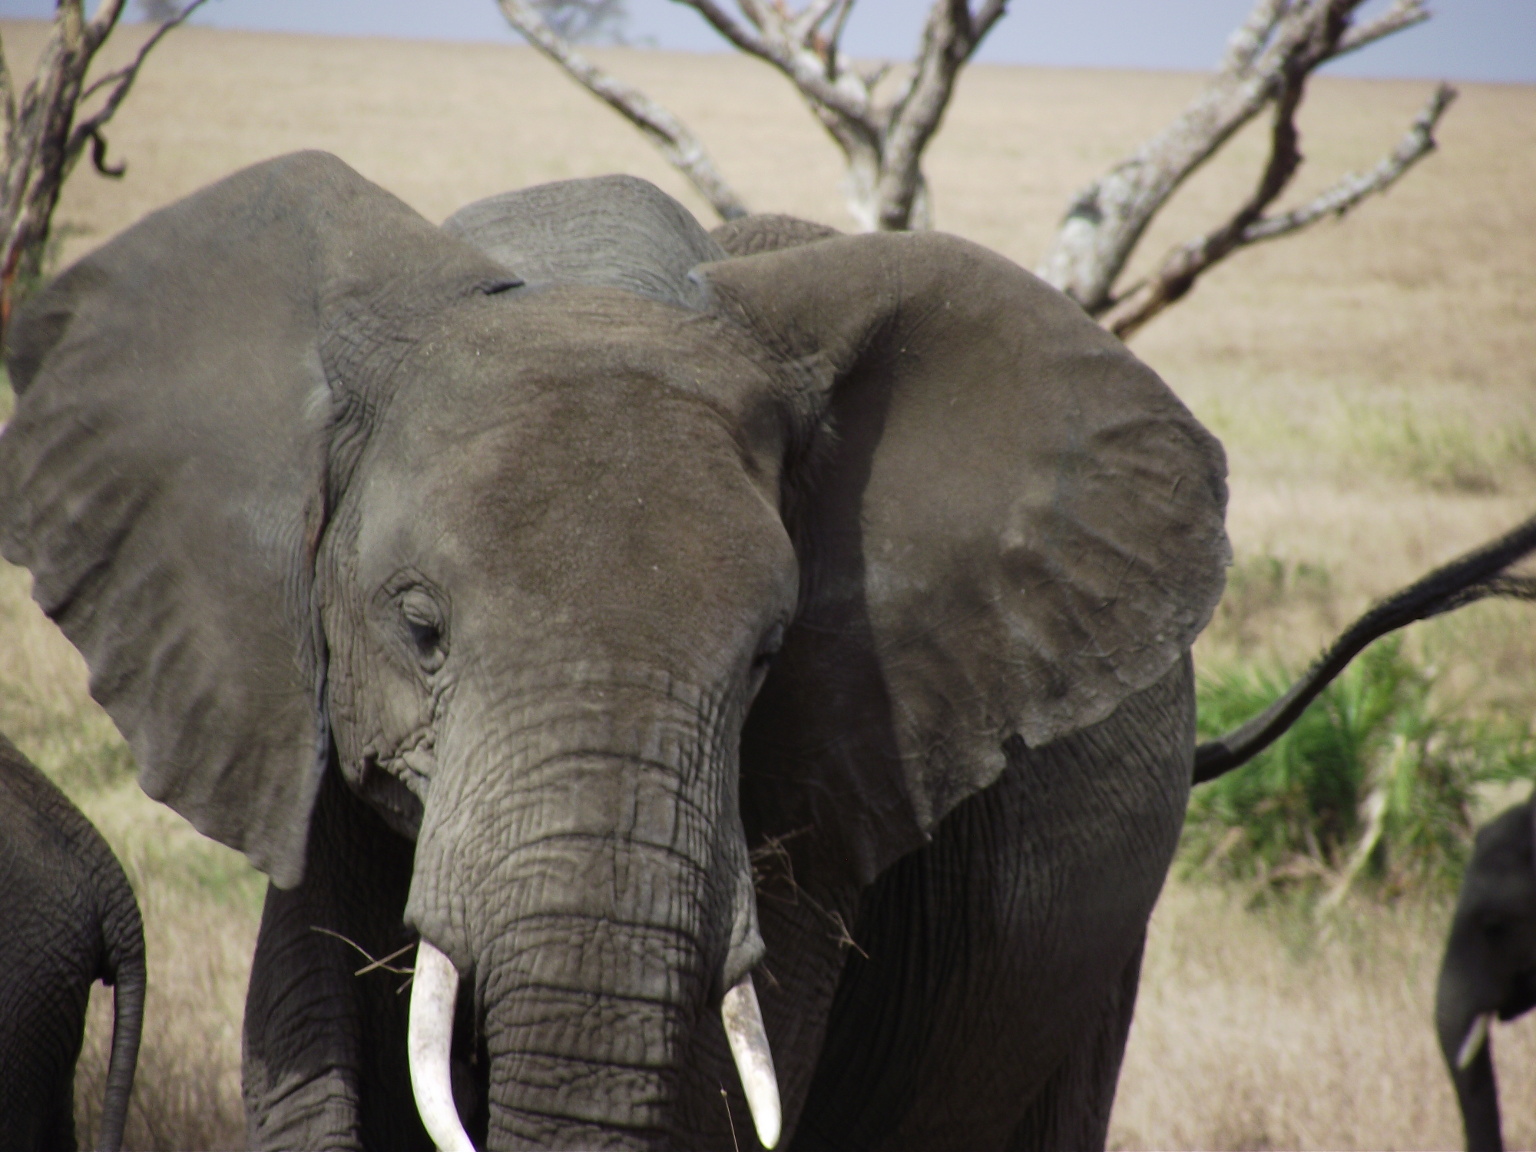 A close-up of an African Elephant.